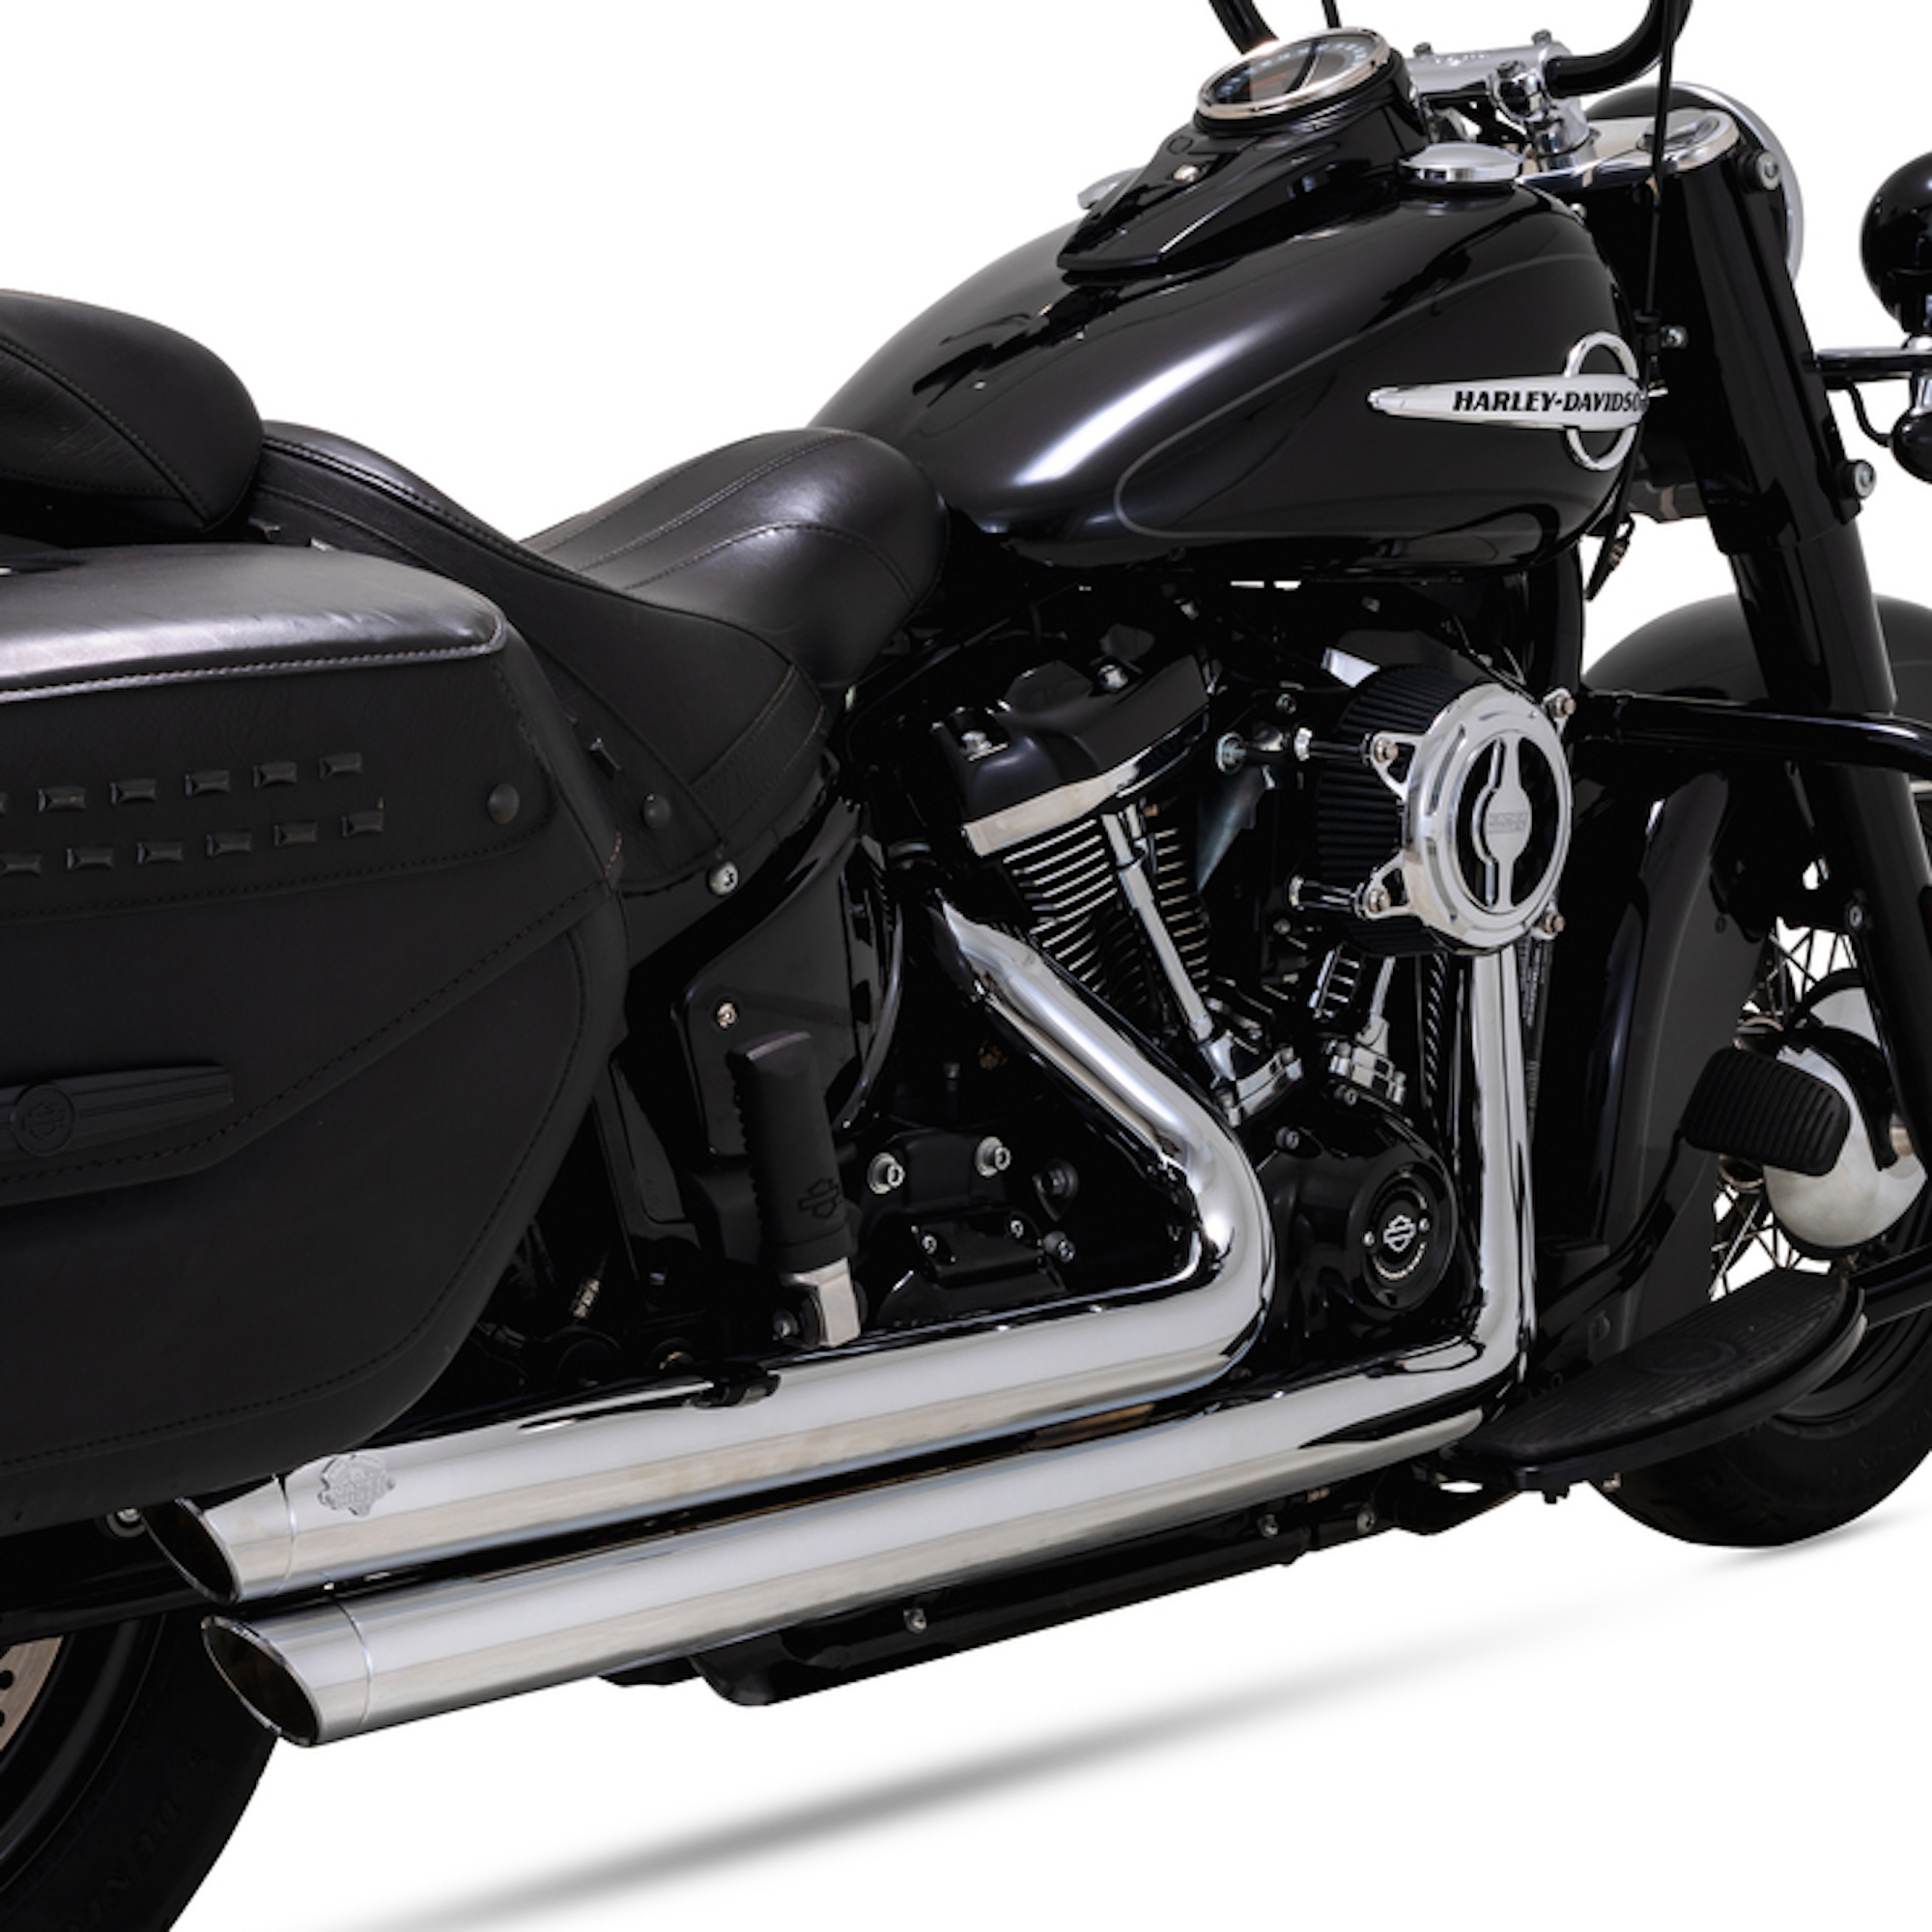 The Vance & Hines PCX Shortshots Staggered system. Media courtesy of the relevant press release.